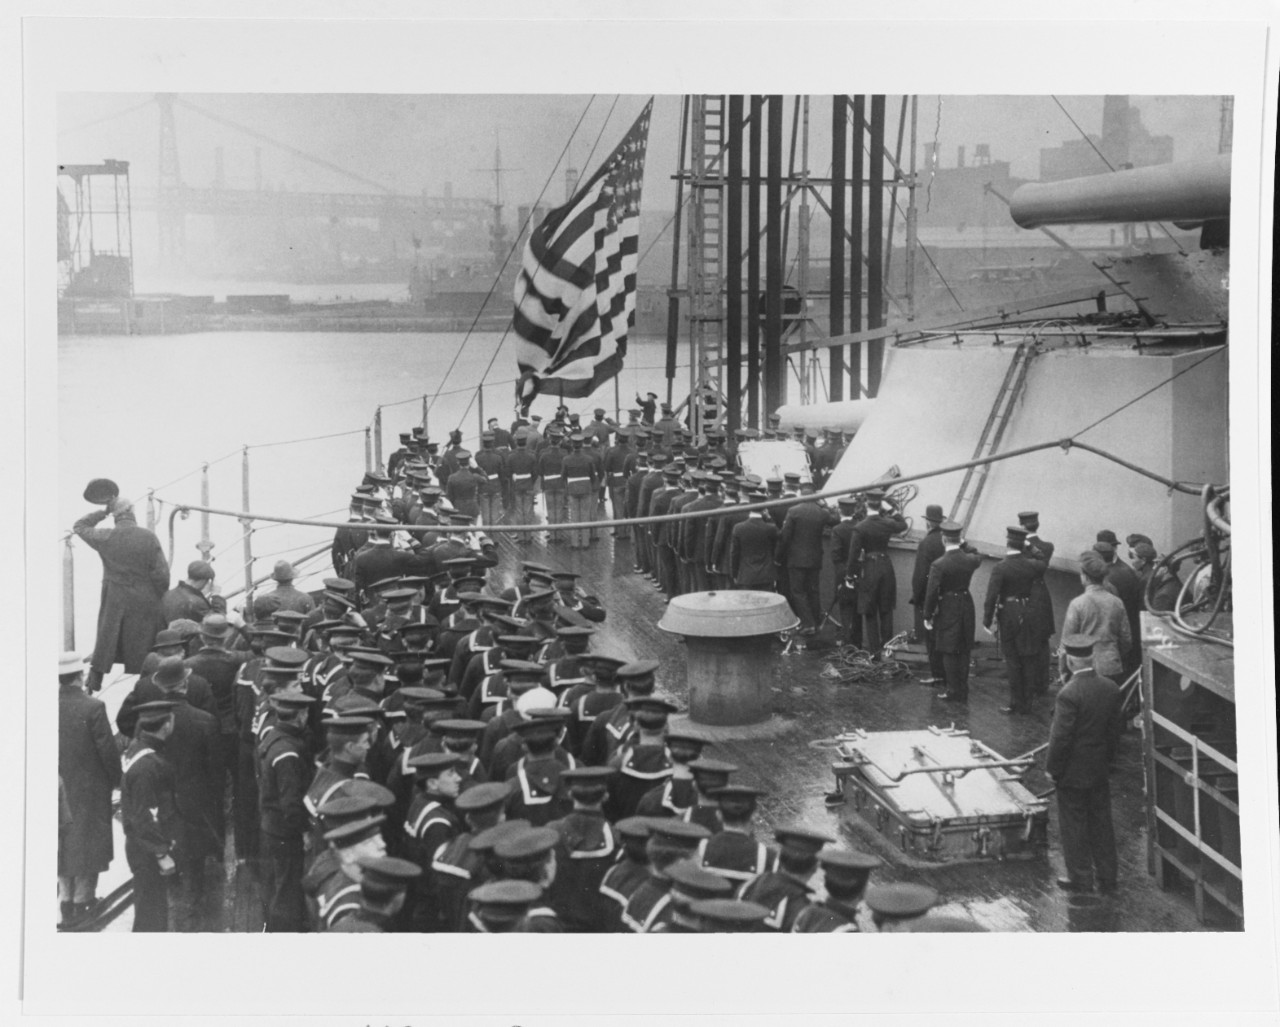 The National Ensign is raised at New York's stern during her commissioning ceremonies, 15 April 1914, at the New York Navy Yard, Brooklyn, N.Y. Courtesy of the Naval Historical Foundation, 1975. (Naval History and Heritage Command Photograph NH 8...